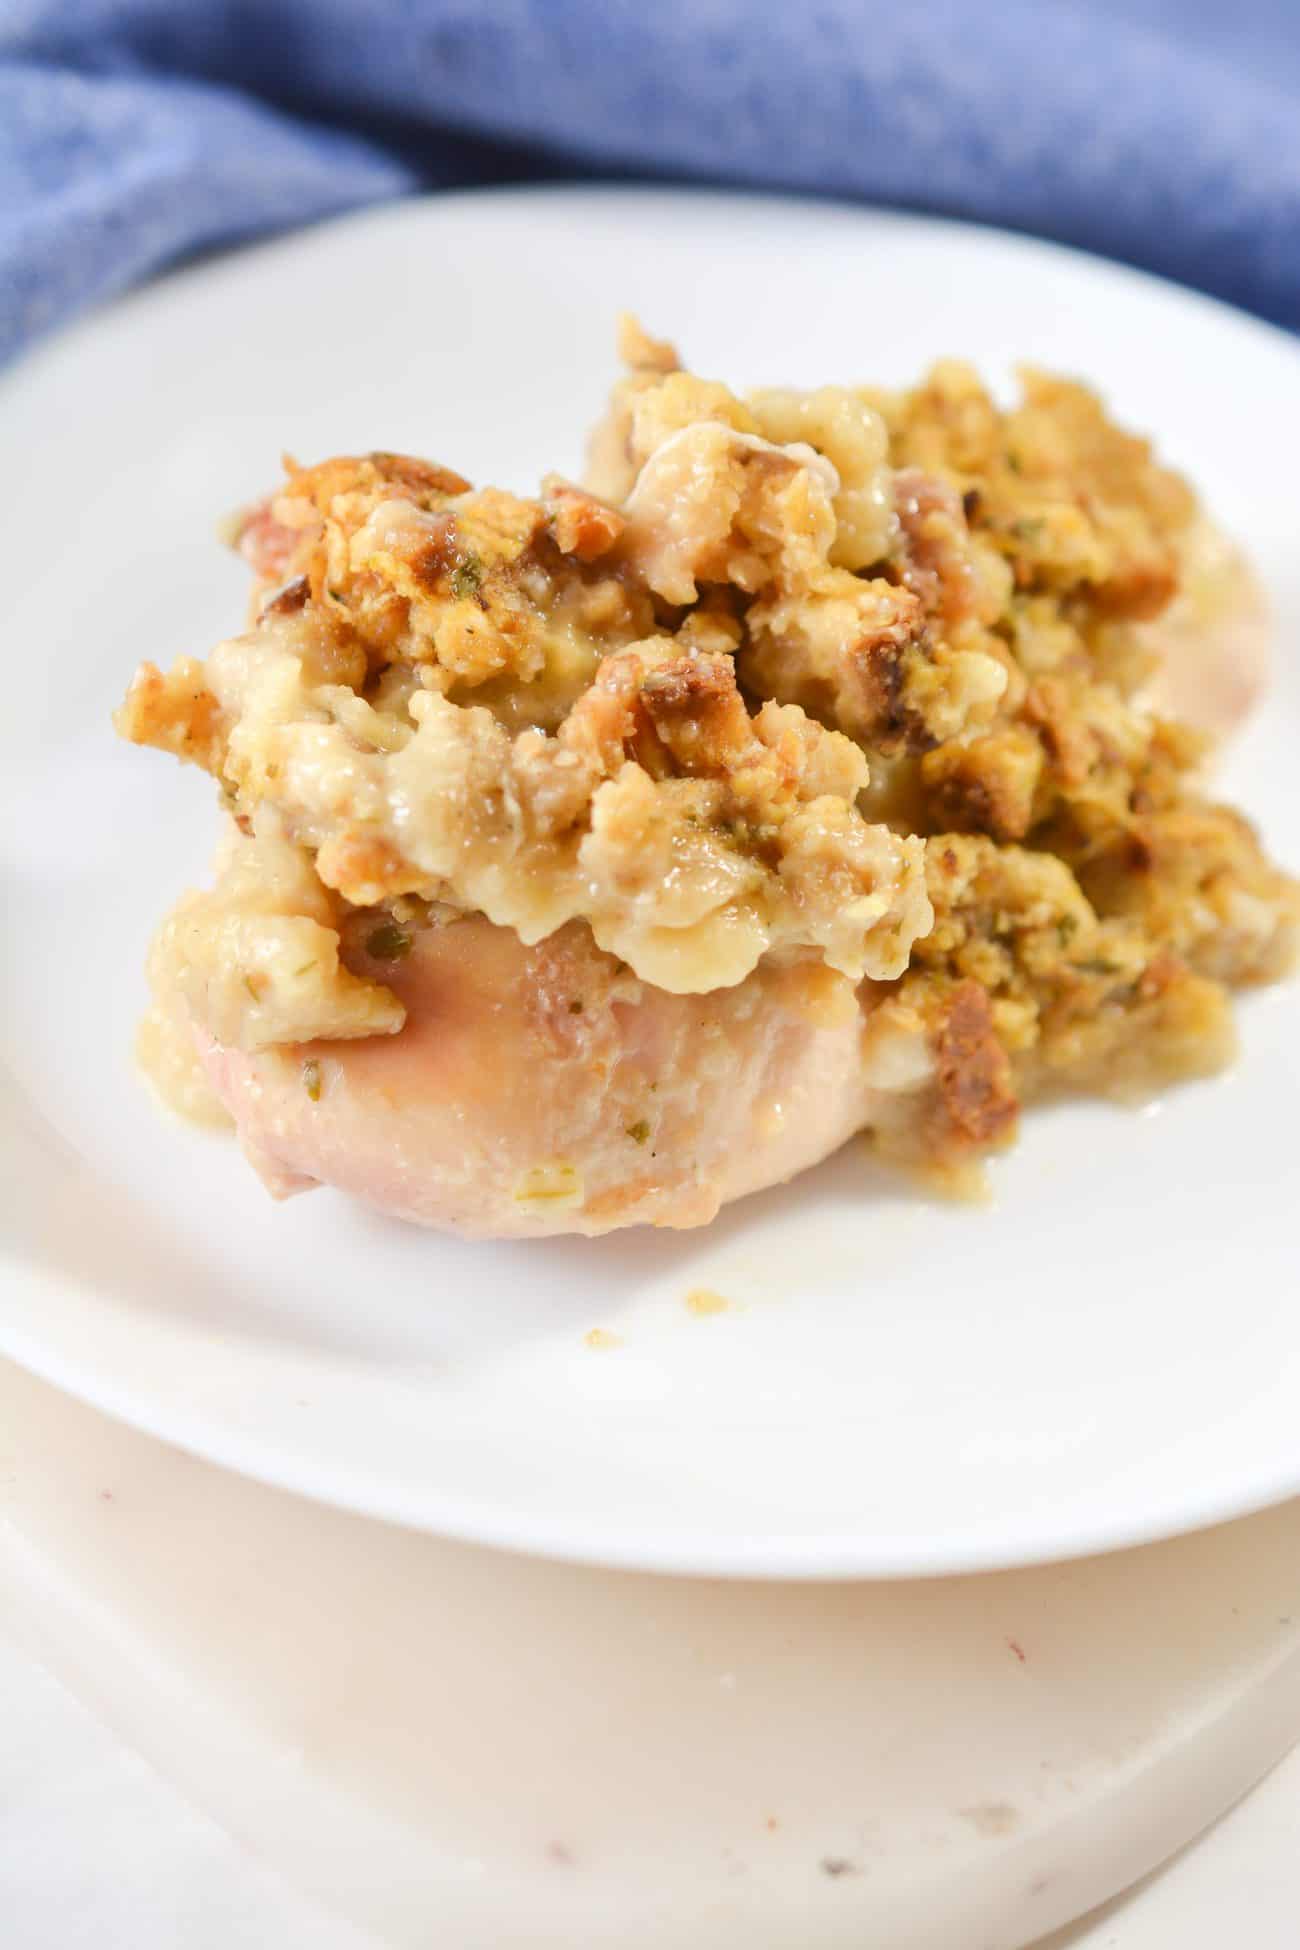 Hearty and Tasty Chicken and Stuffing